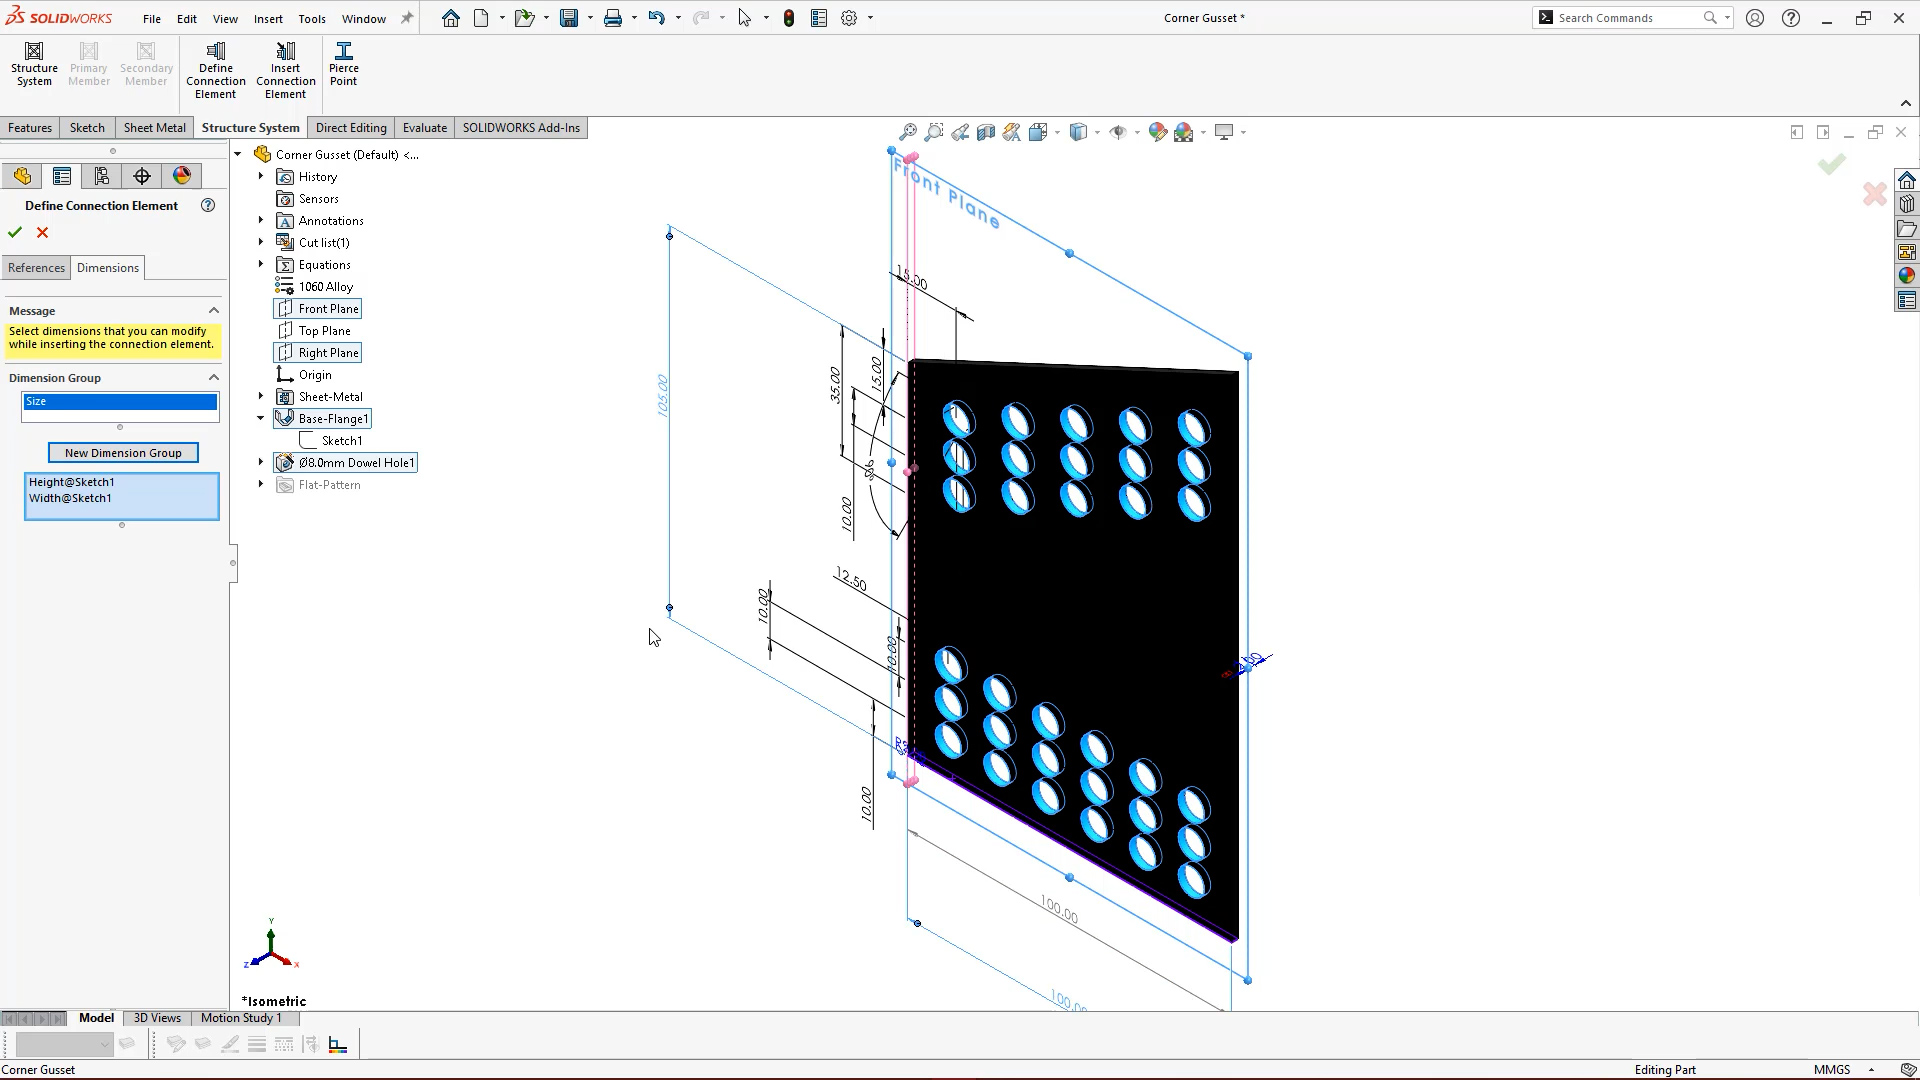 Dimension groups for Connection Elements in SOLIDWORKS 2022